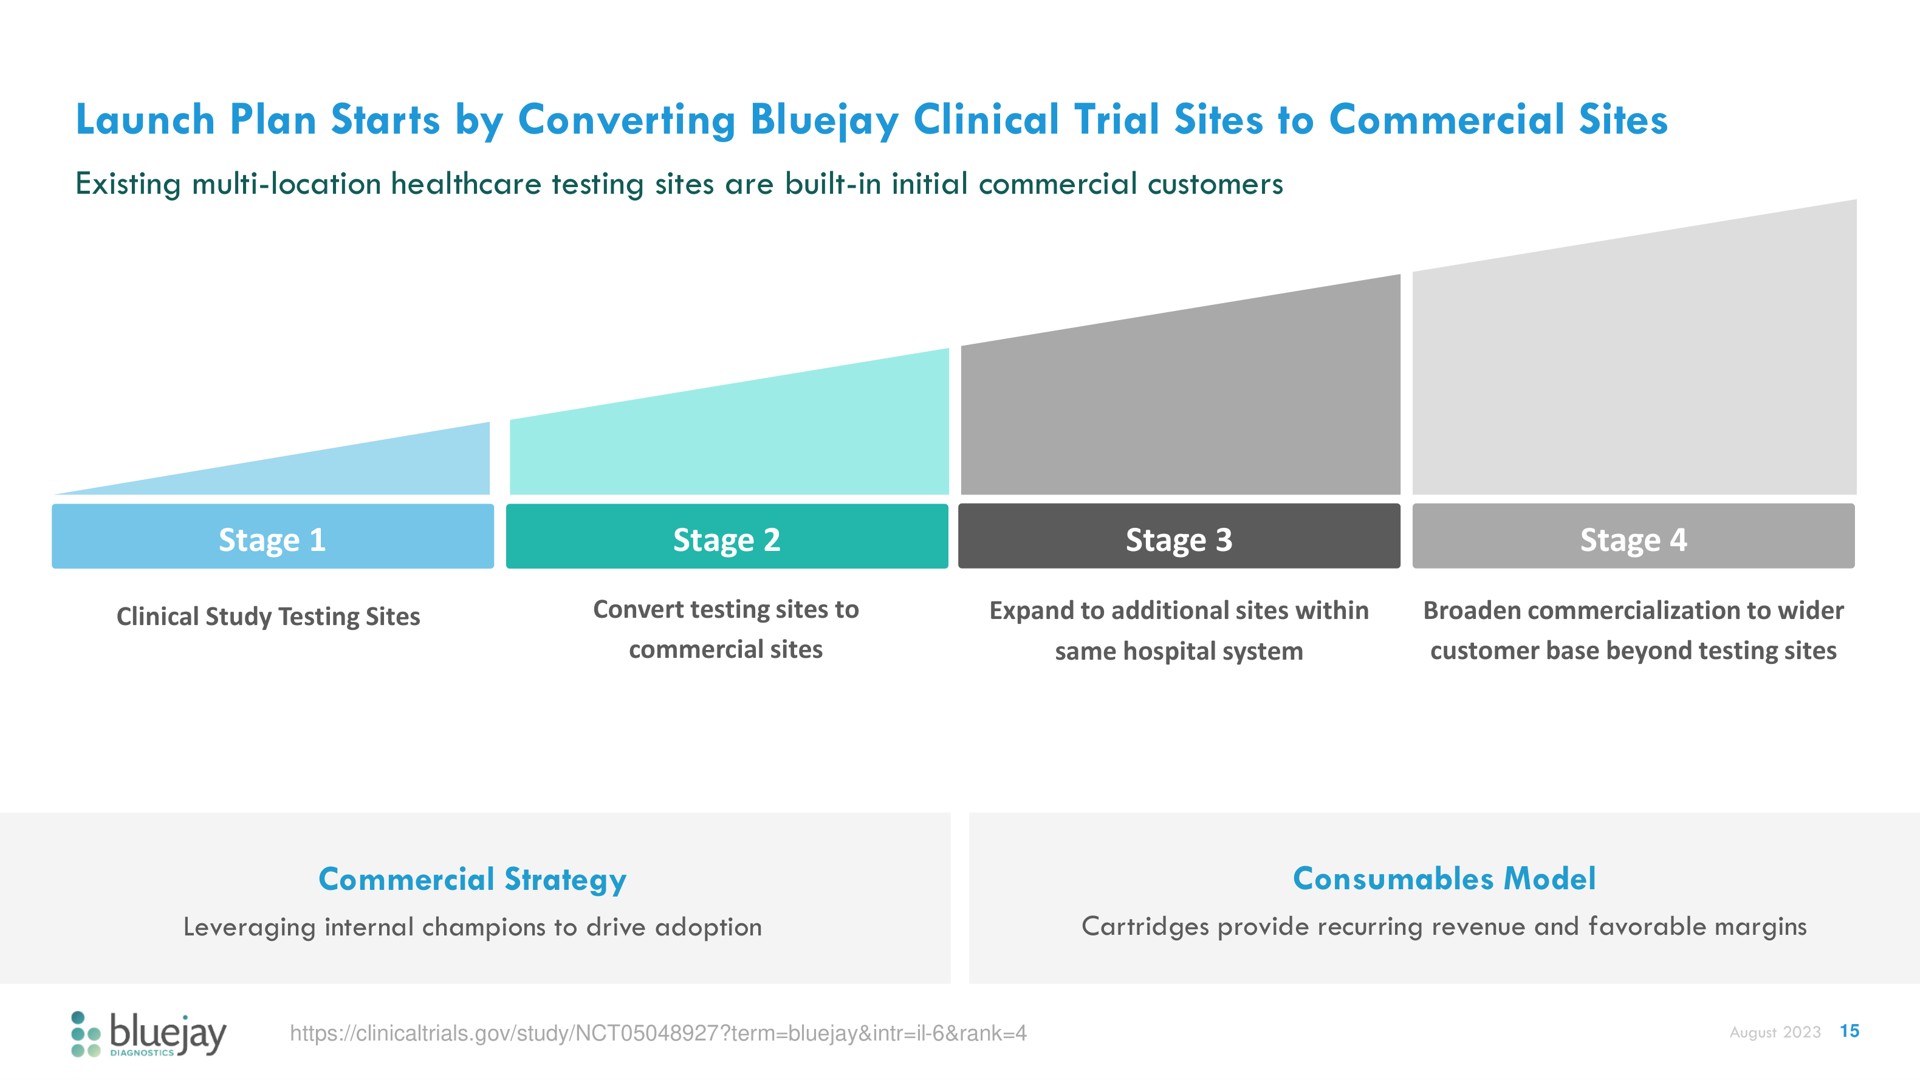 launch plan starts by converting clinical trial sites to commercial sites | Bluejay